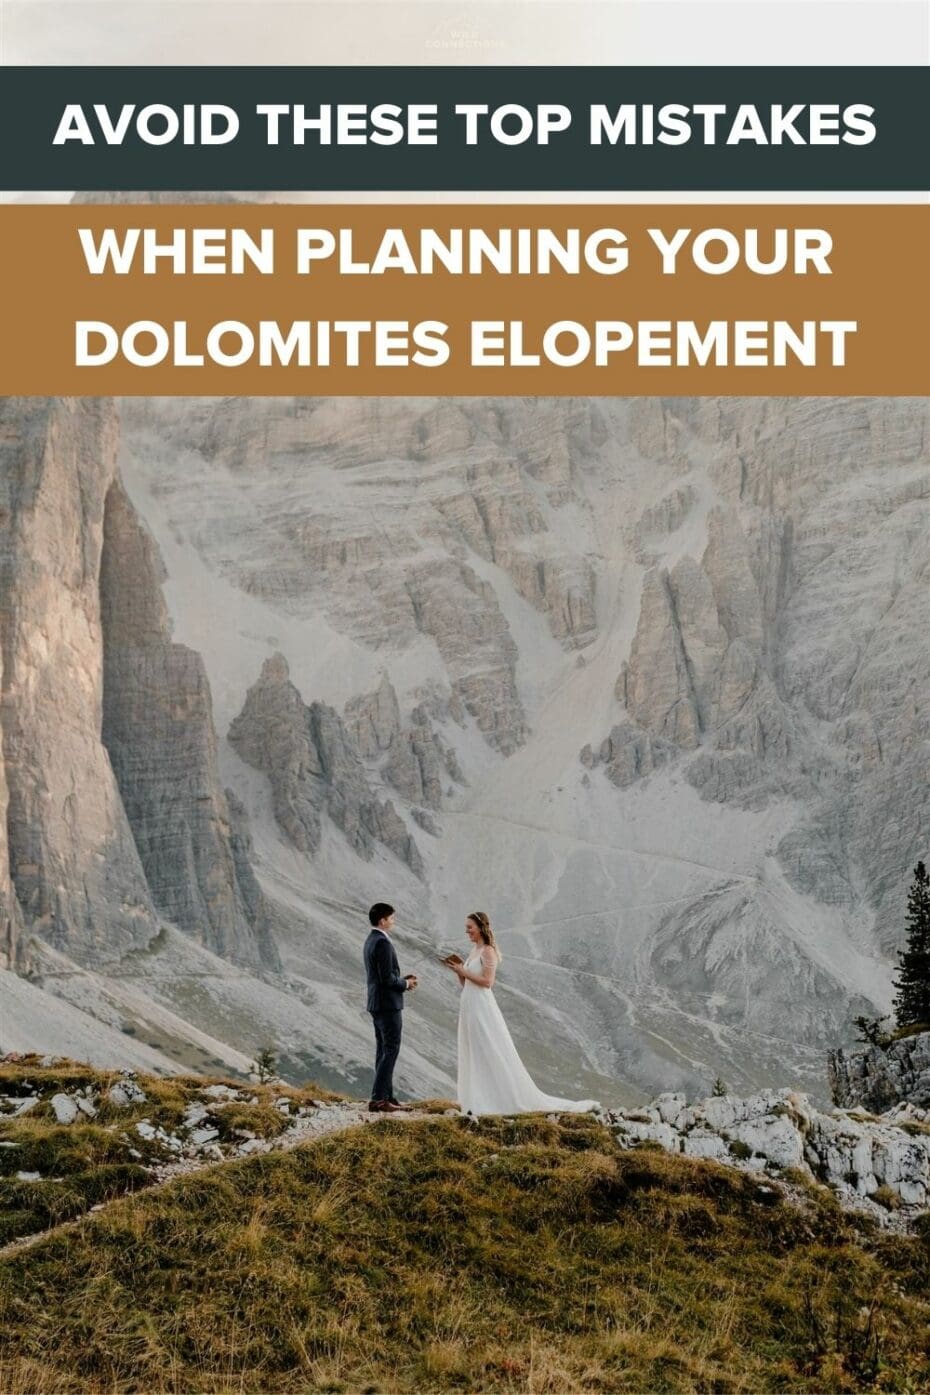 Mistakes to avoid when planning your Dolomites elopement